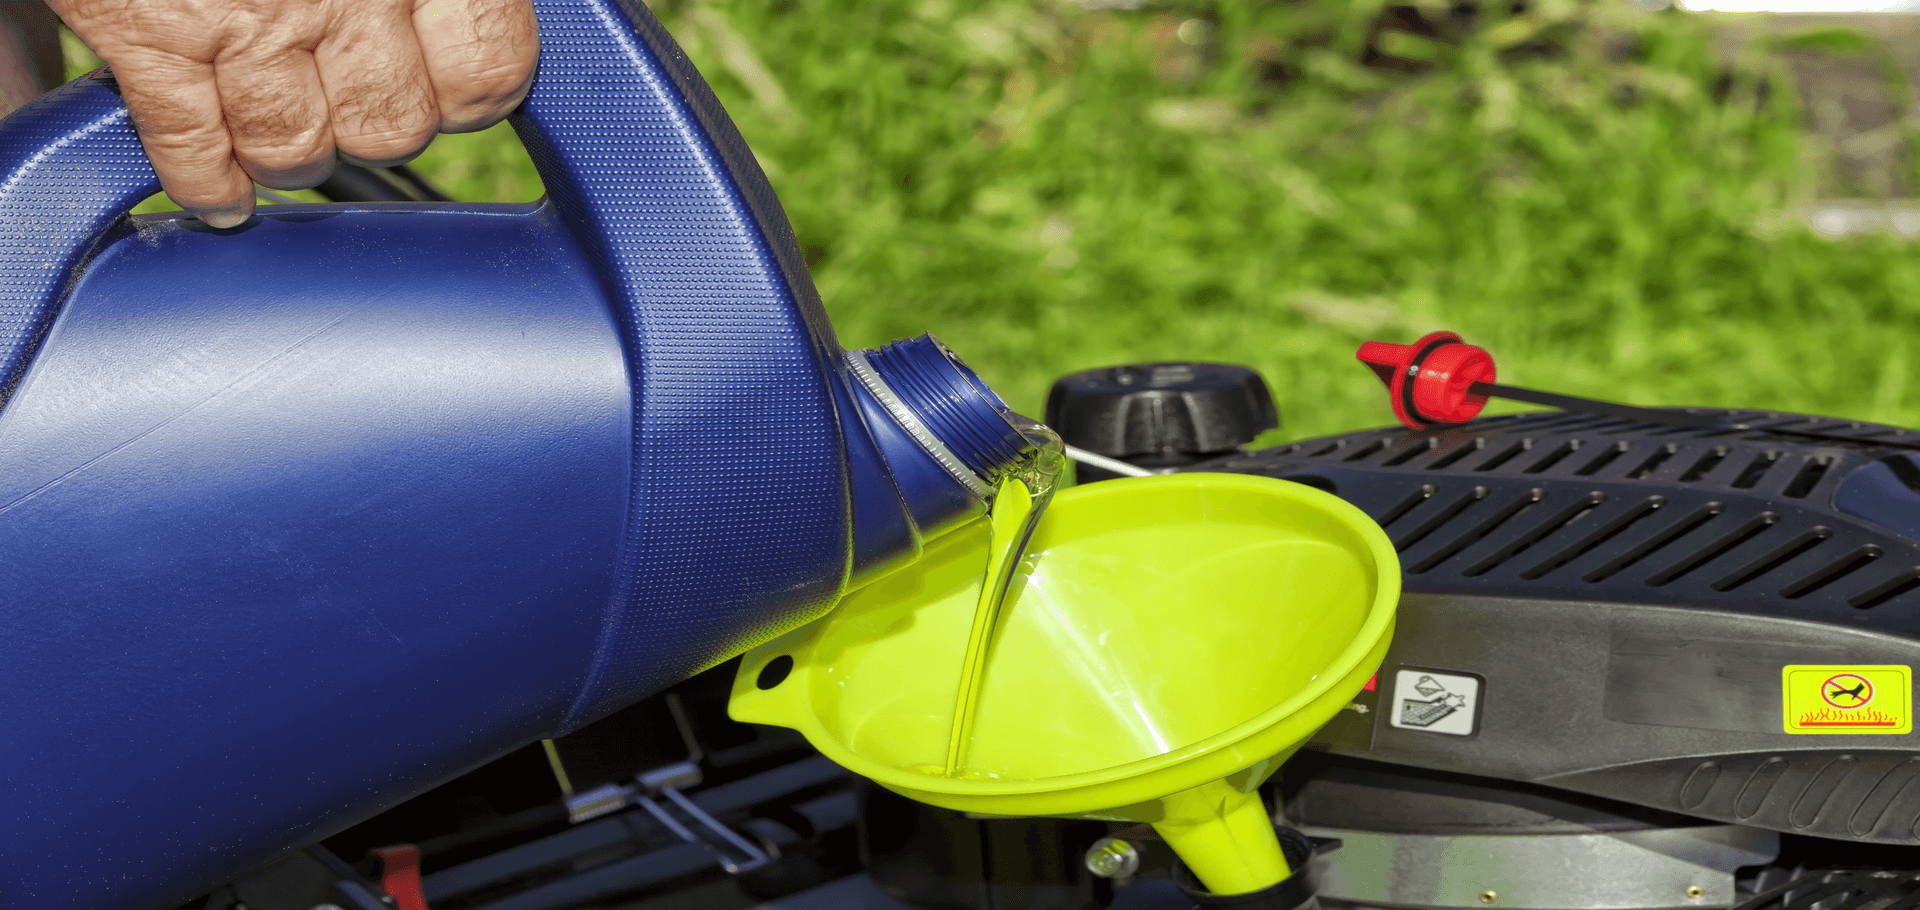 When to change your lawn mower oil